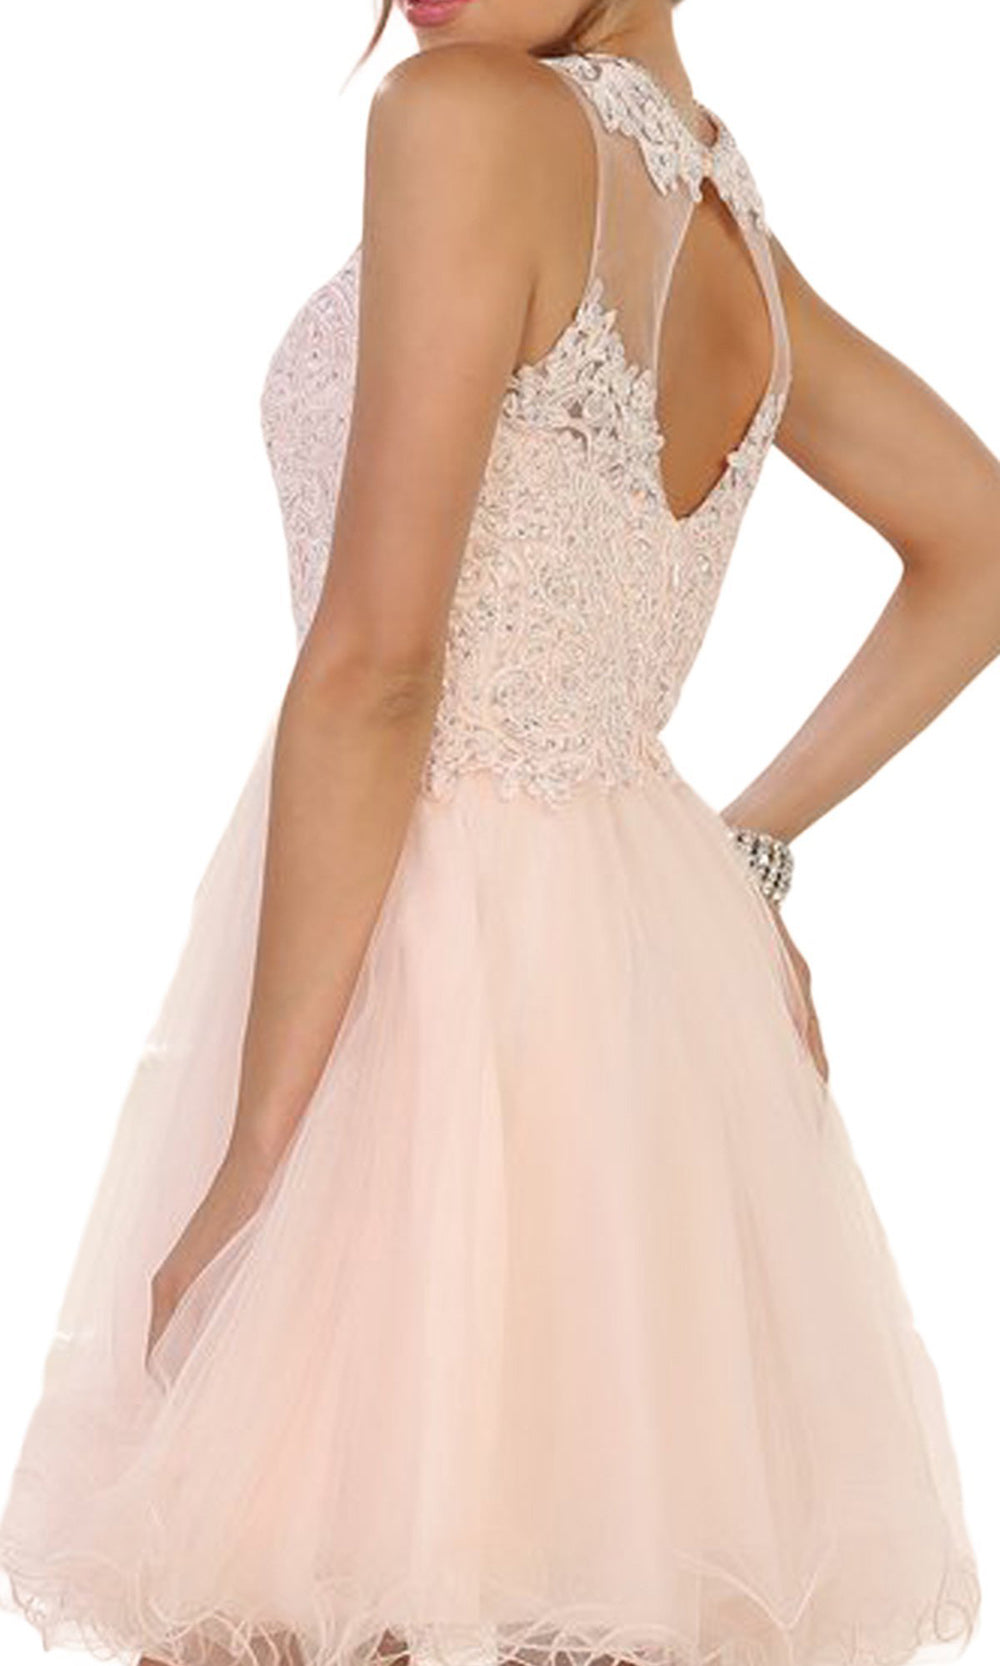 May Queen Embellished Jewel A-line Dress MQ1510 CCSALE 8 / Blush